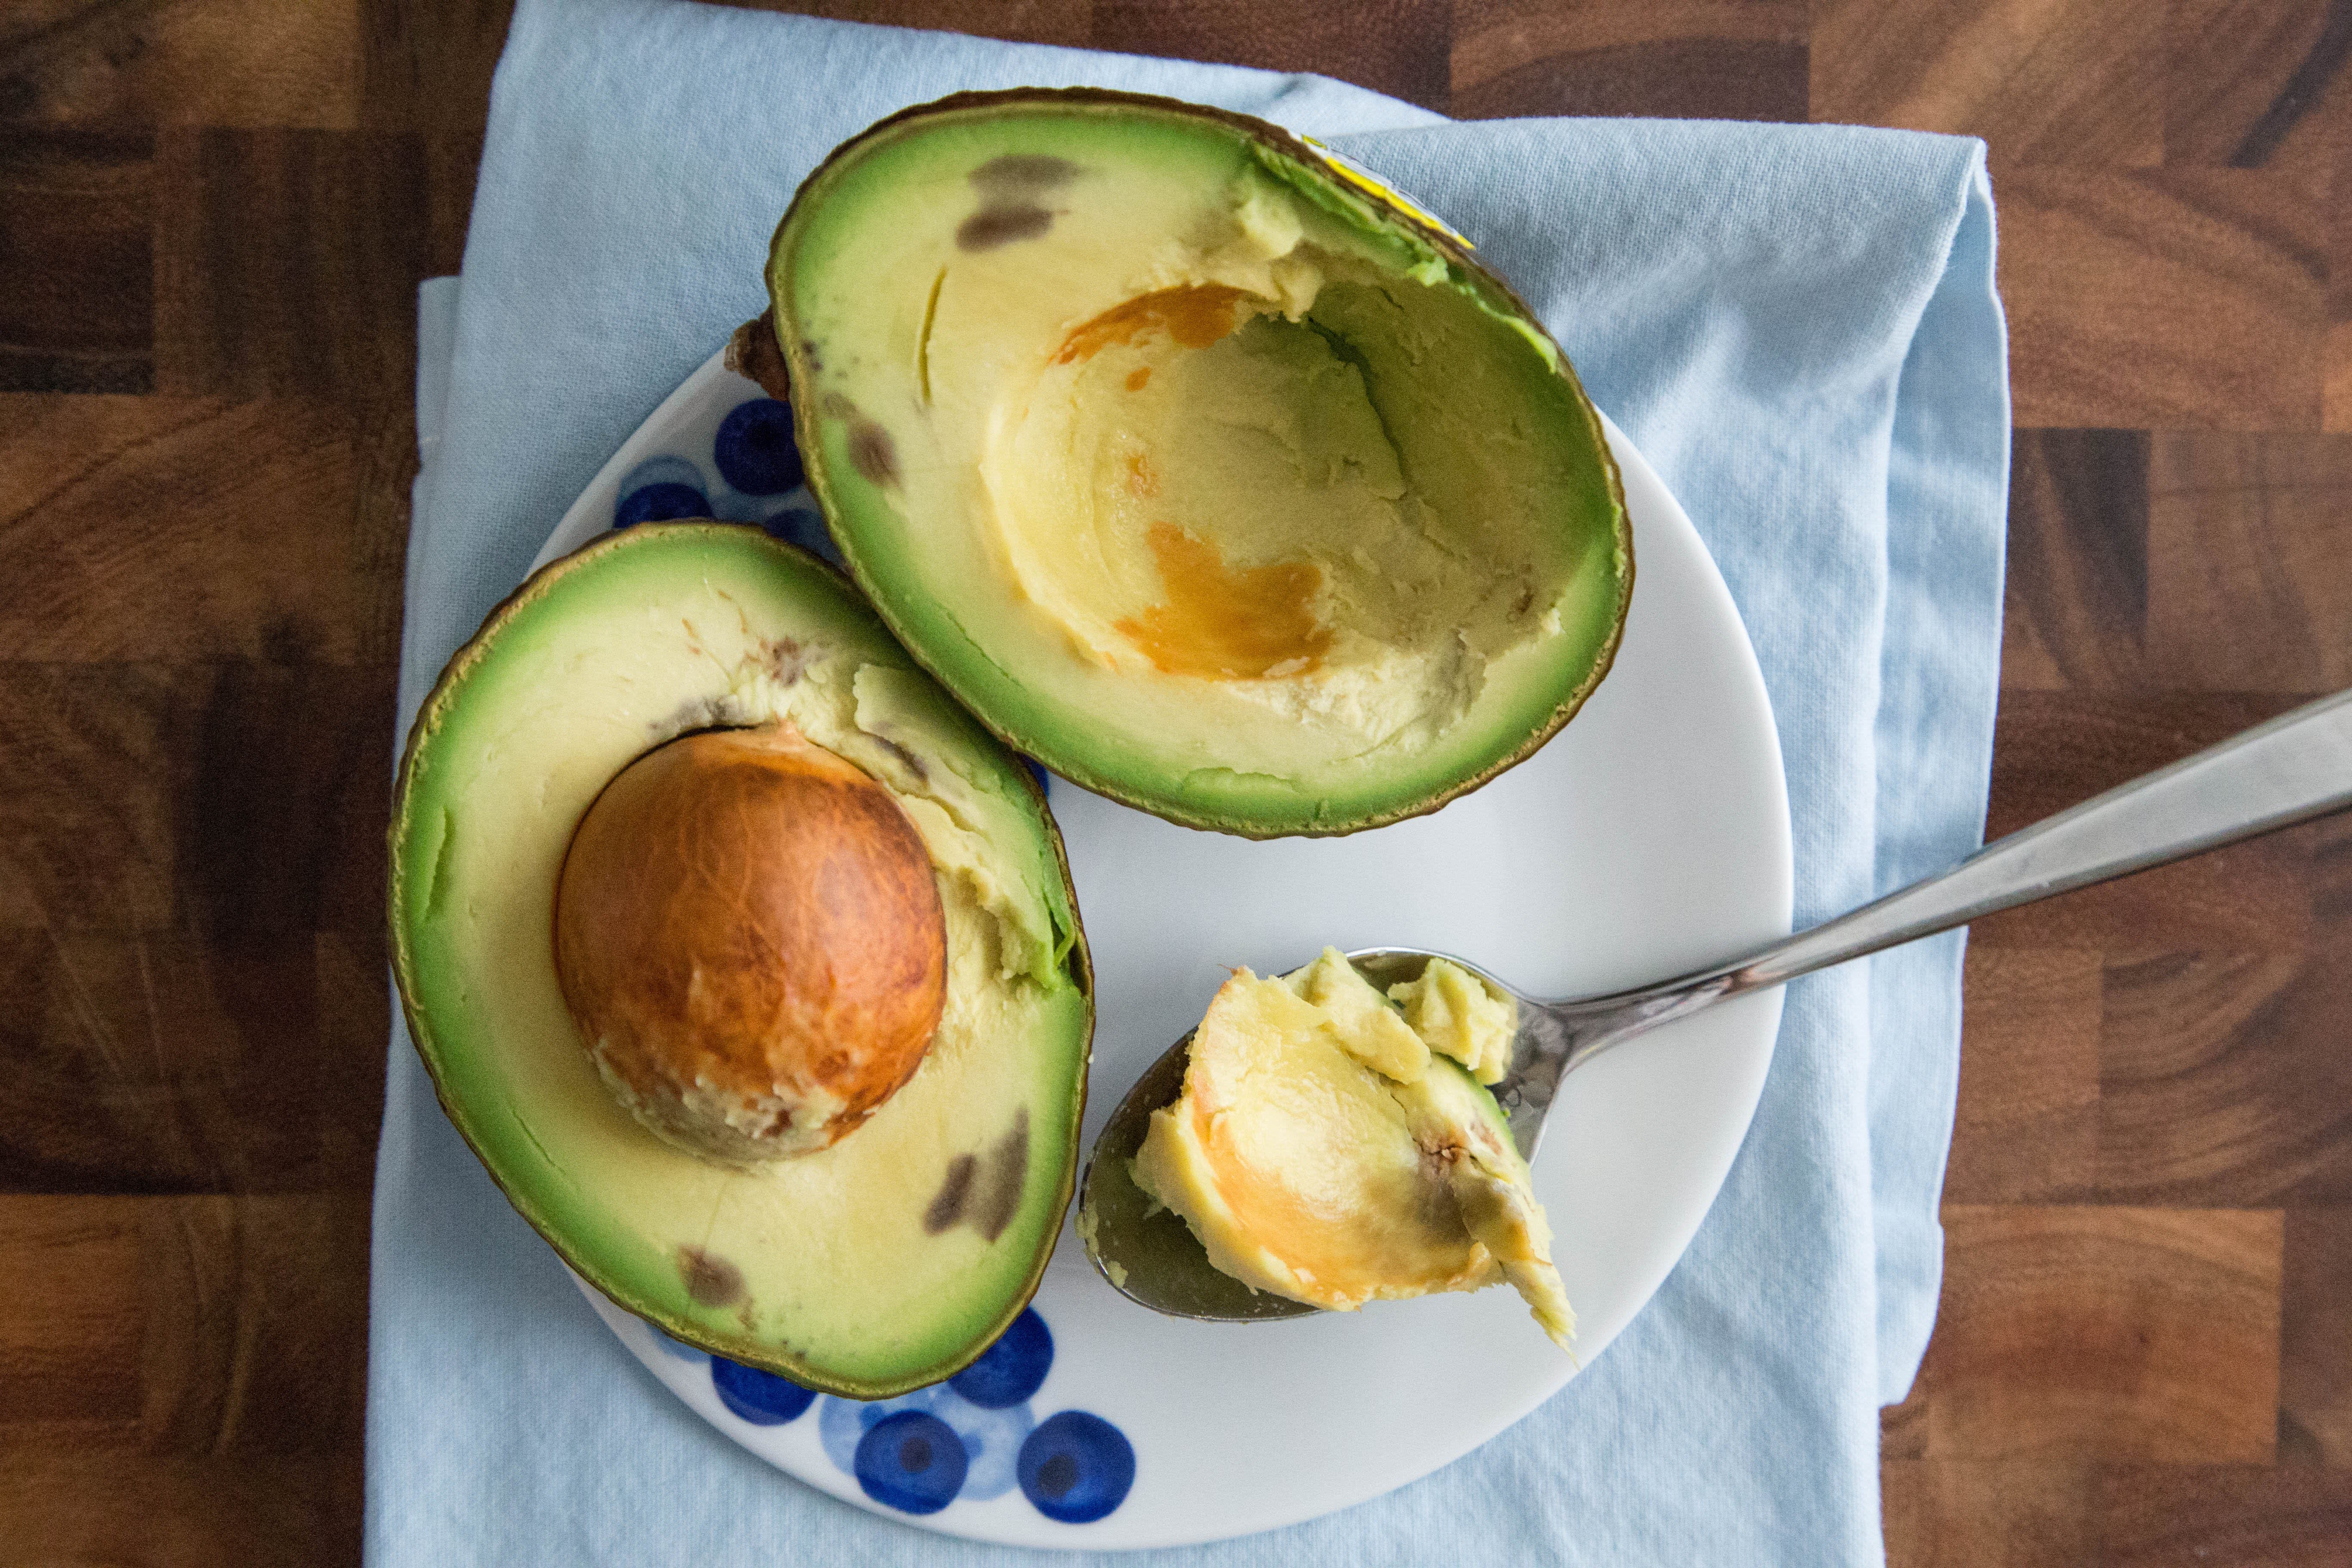 Can You Really Ripen an Avocado in Just 10 Minutes? | Kitchn